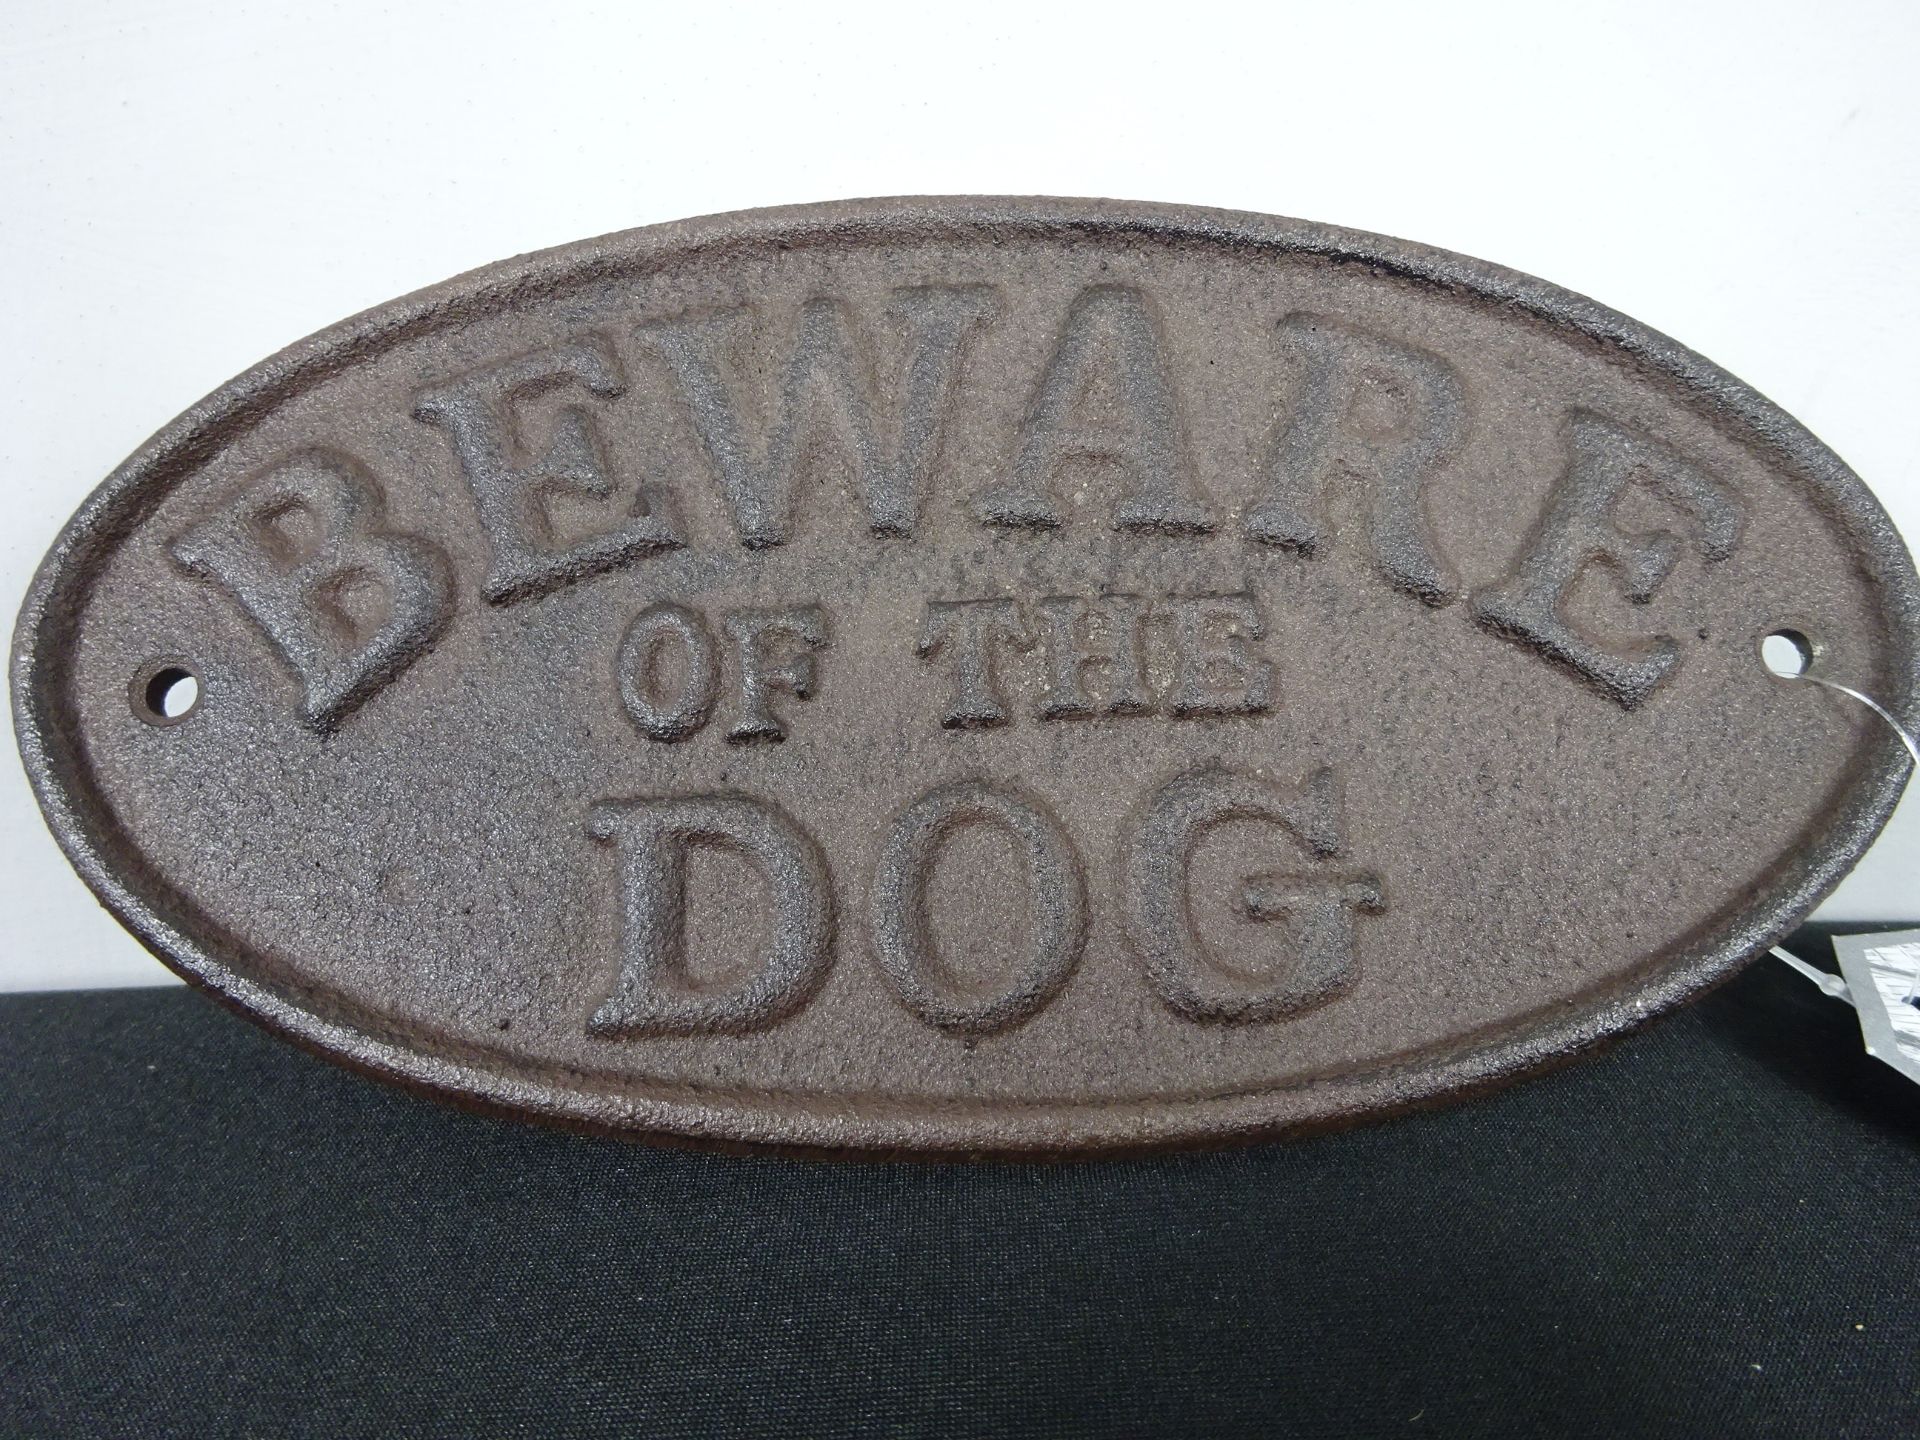 New Fallen Fruits Sign Beware Of The Dog